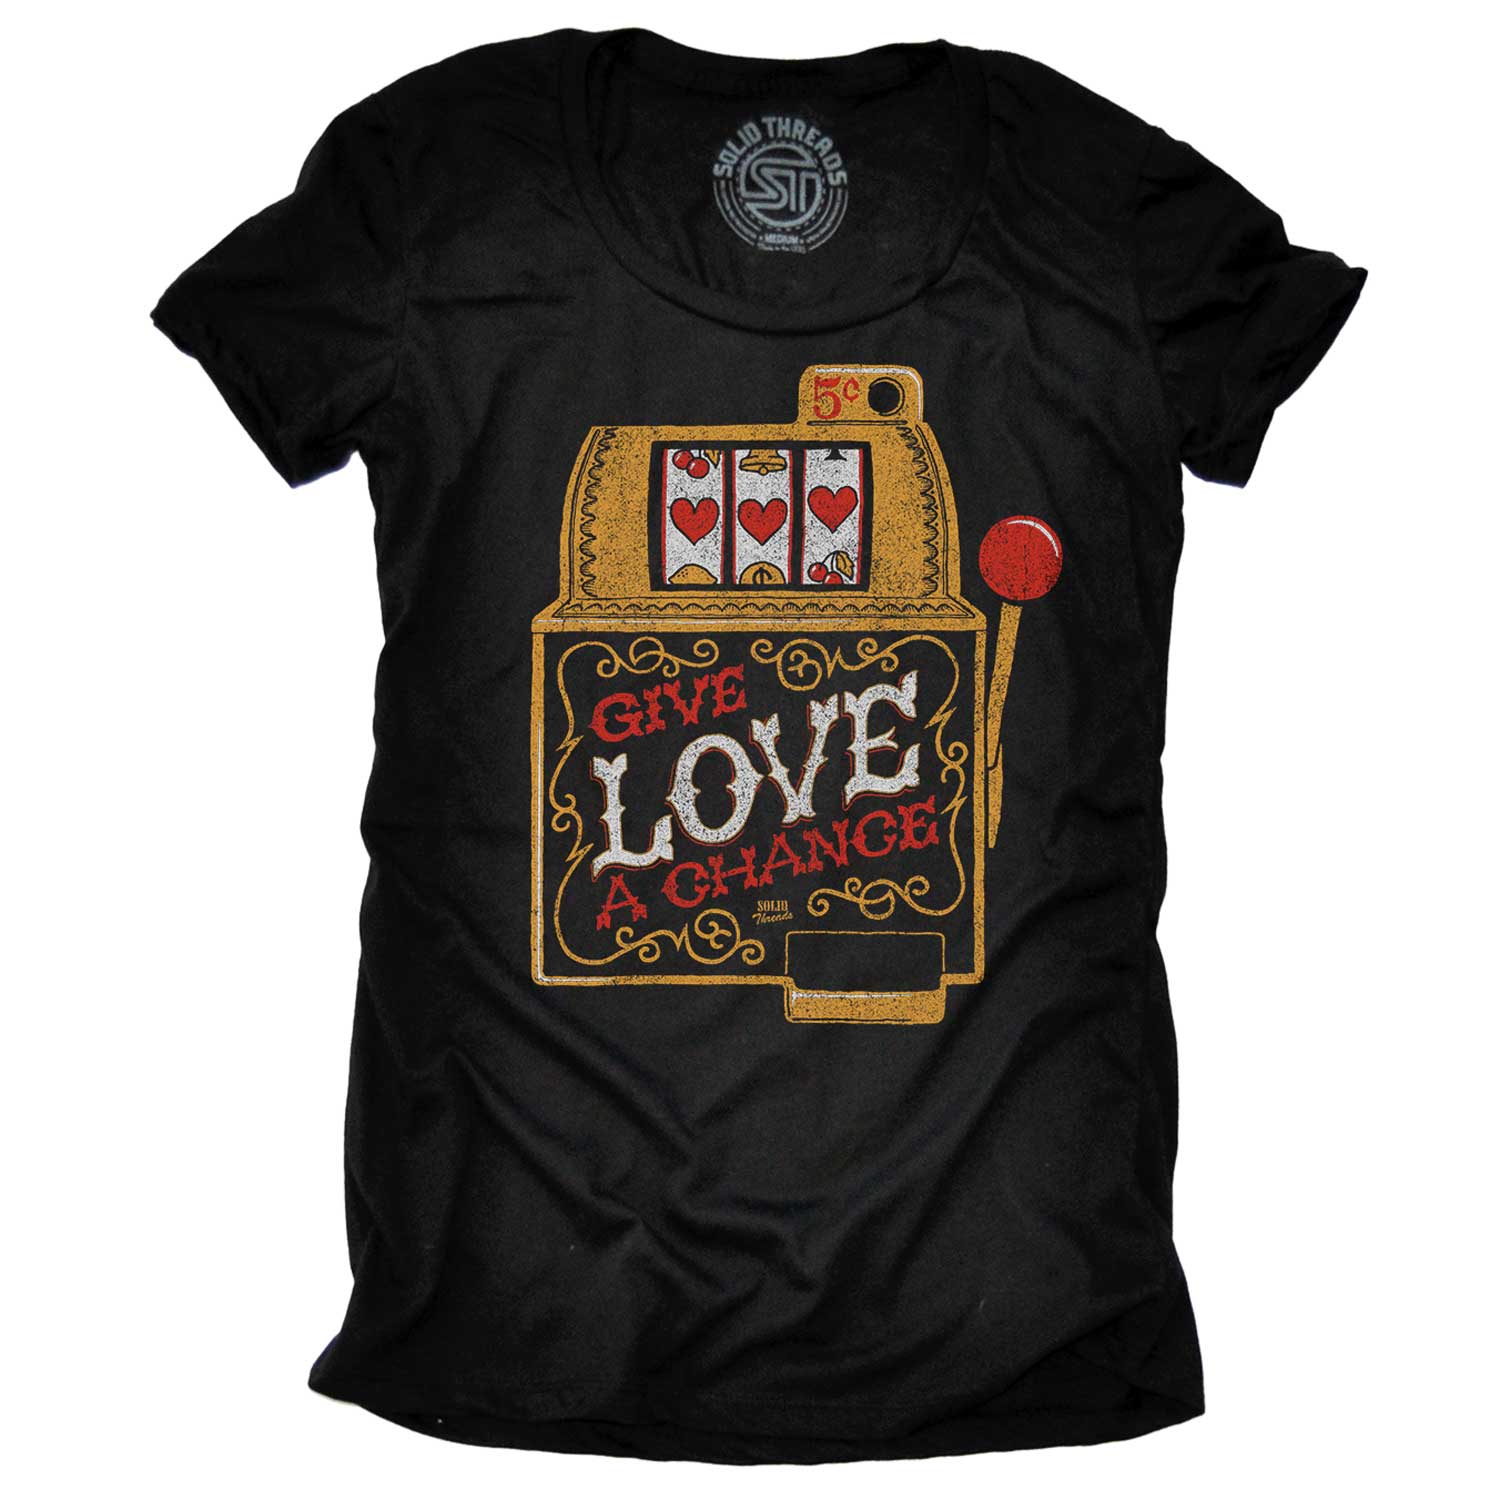 Women's Give Love A Chance Vintage Graphic Tee | Cool Slot Machine T-shirt for Women | Solid Threads